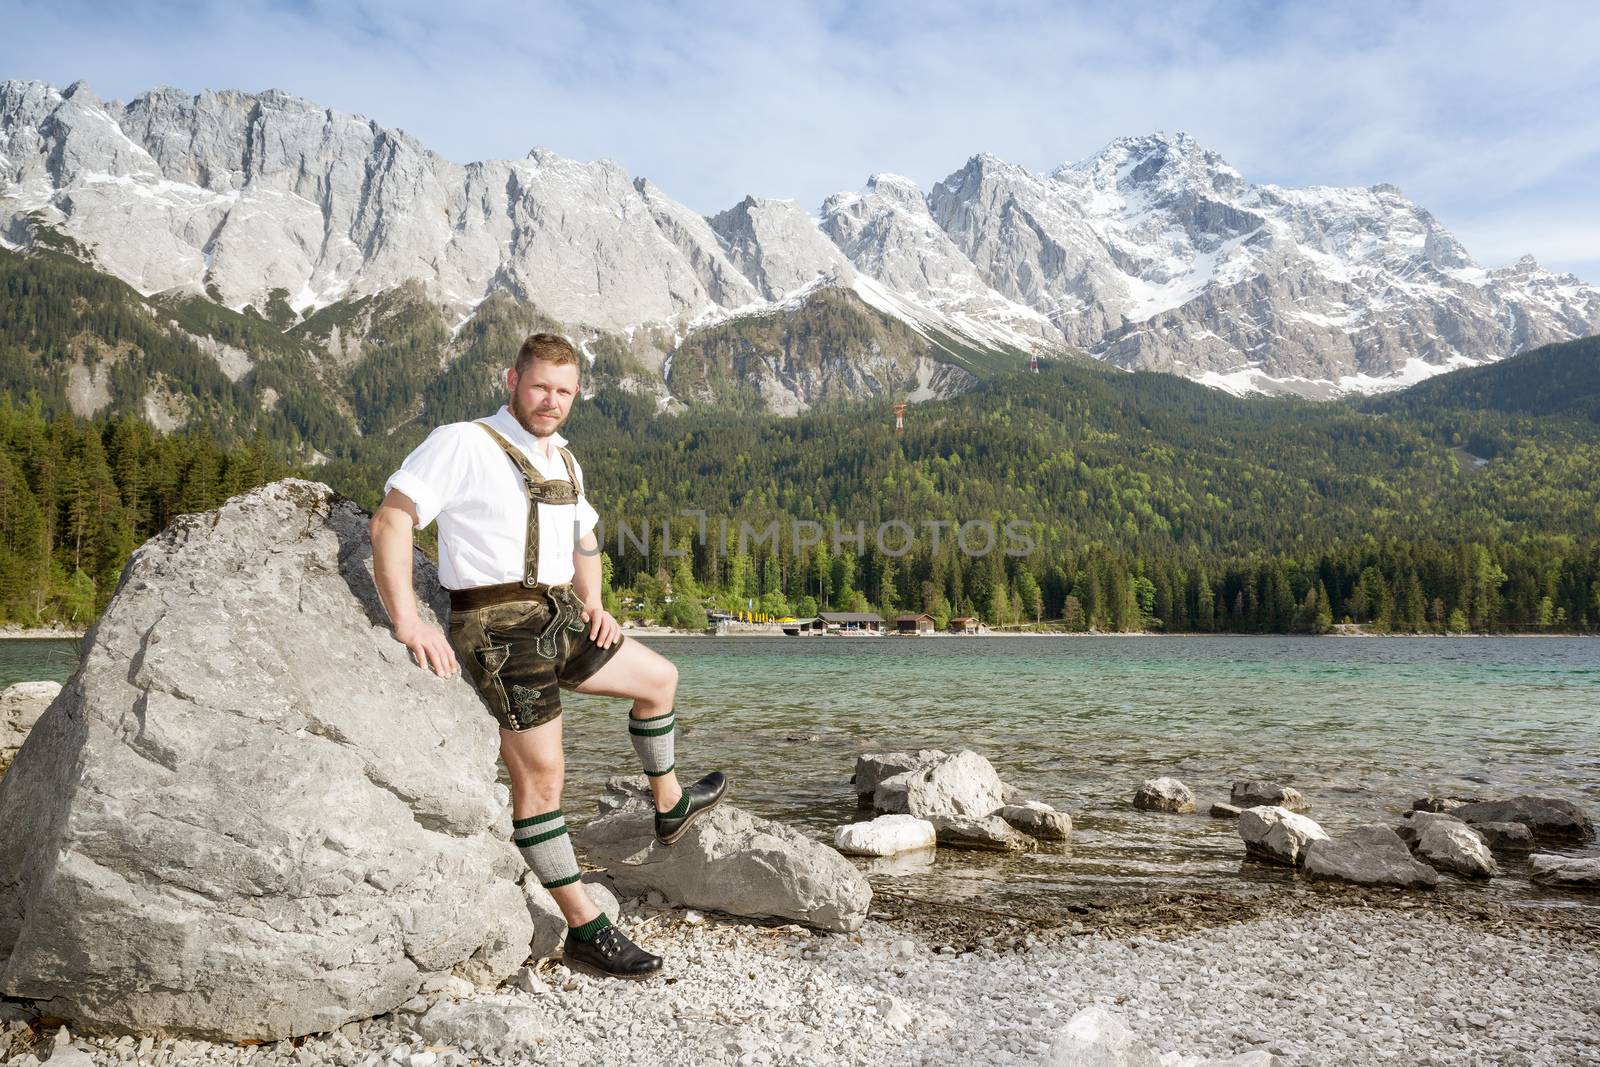 A traditional bavarian man at lake Eibsee with the Zugspitze mountain in the background